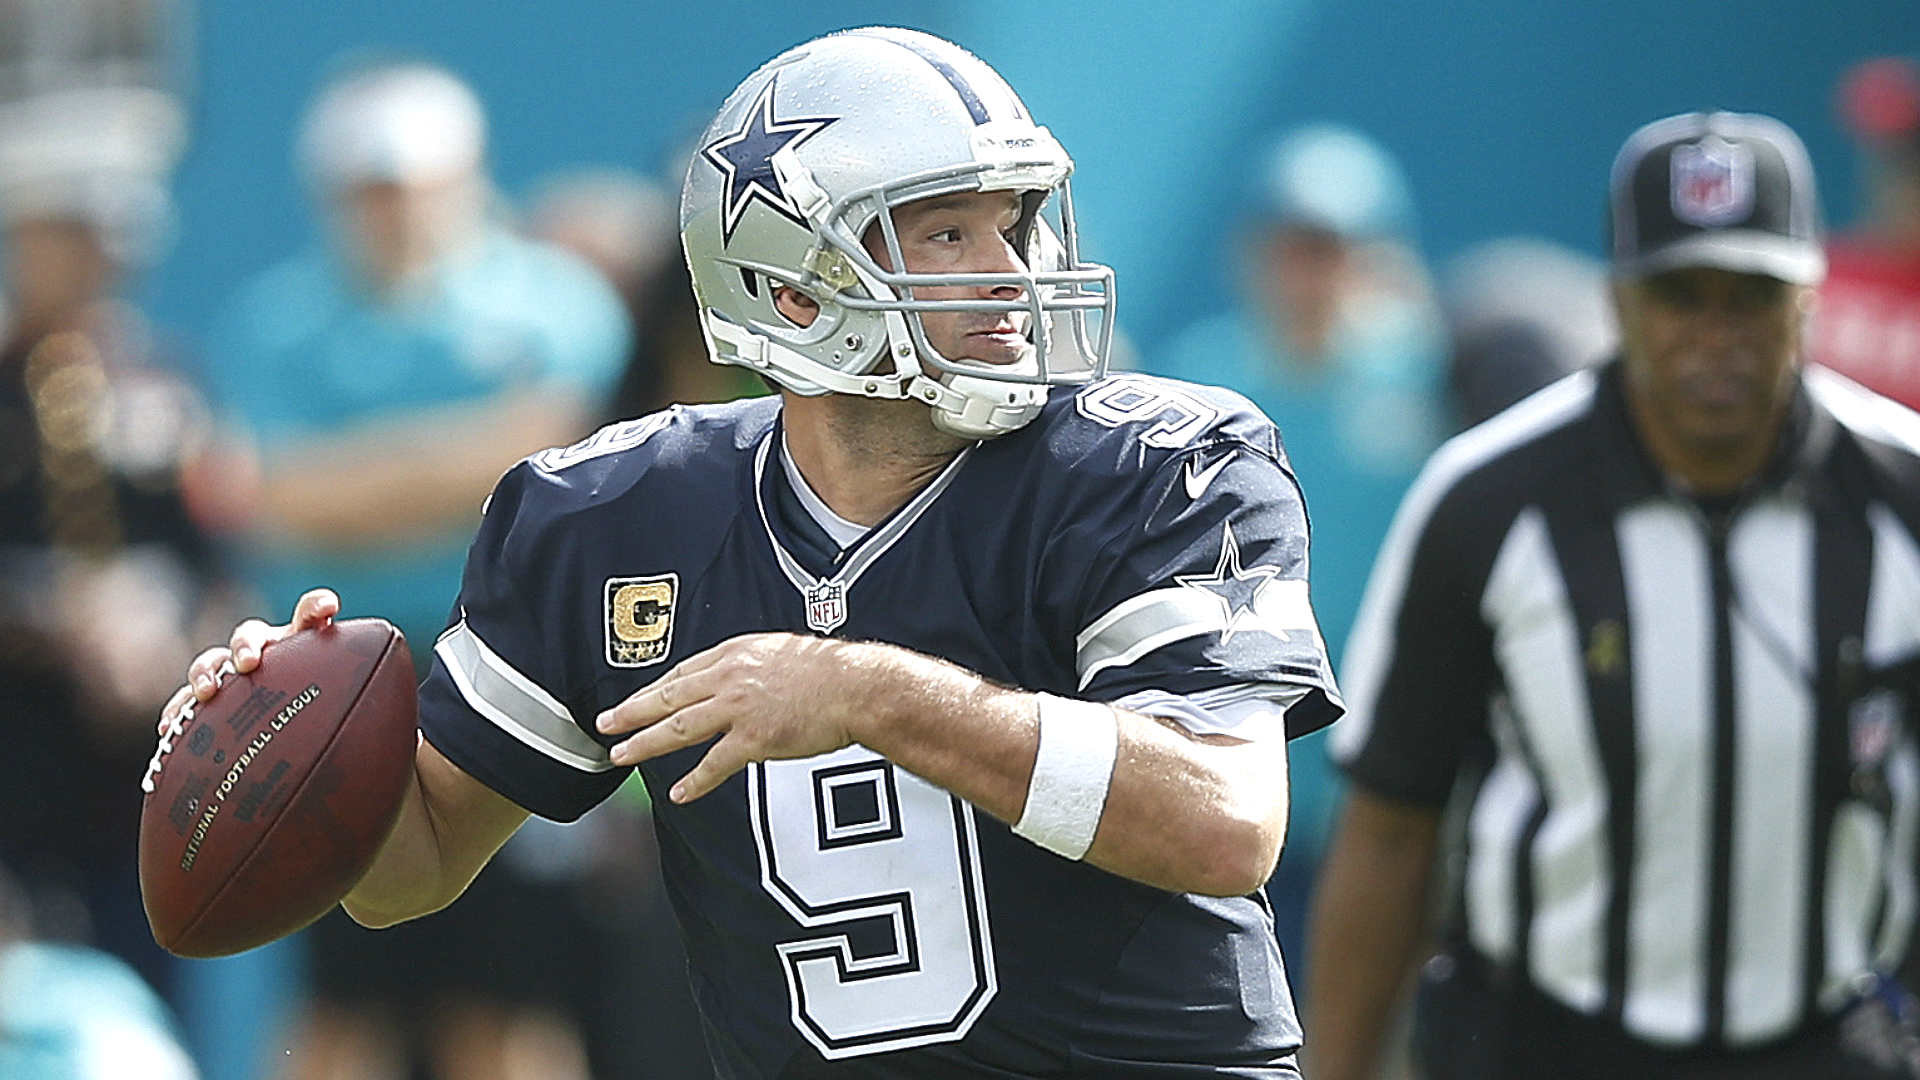 1920x1080 NFL free agency: Cowboys to release QB Tony Romo, reports say; where will  he land?